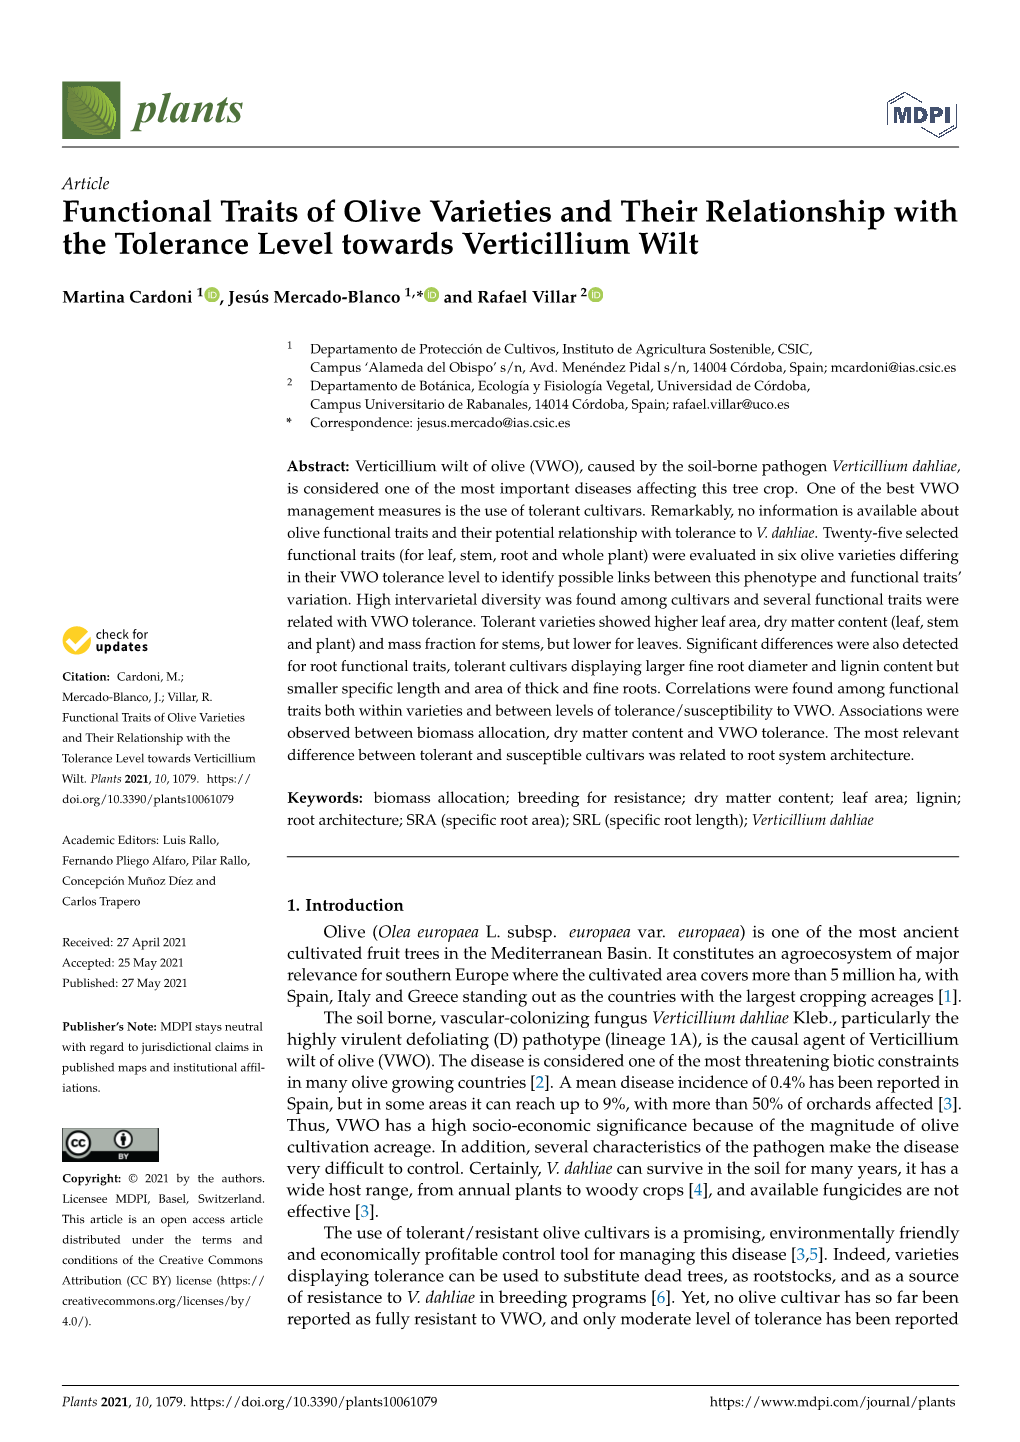 Functional Traits of Olive Varieties and Their Relationship with the Tolerance Level Towards Verticillium Wilt